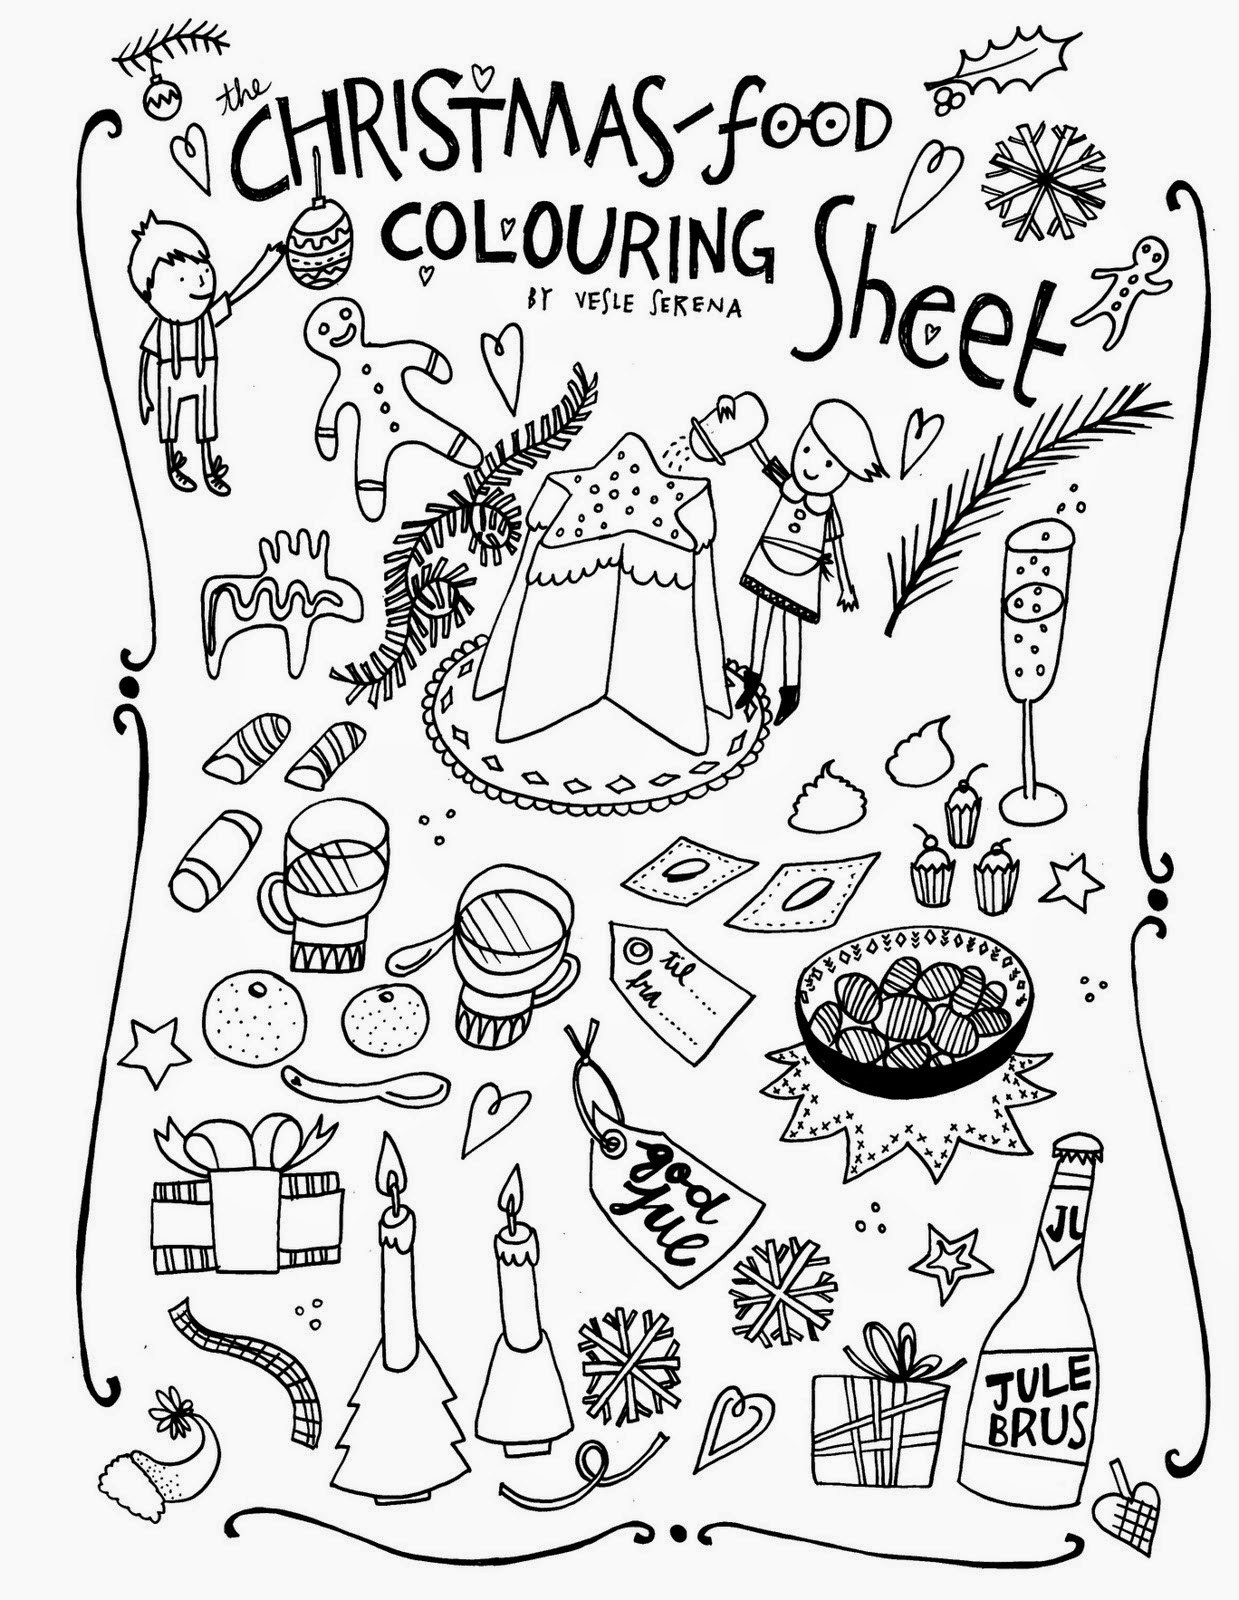 Cute and whimsical Christmas colouring page